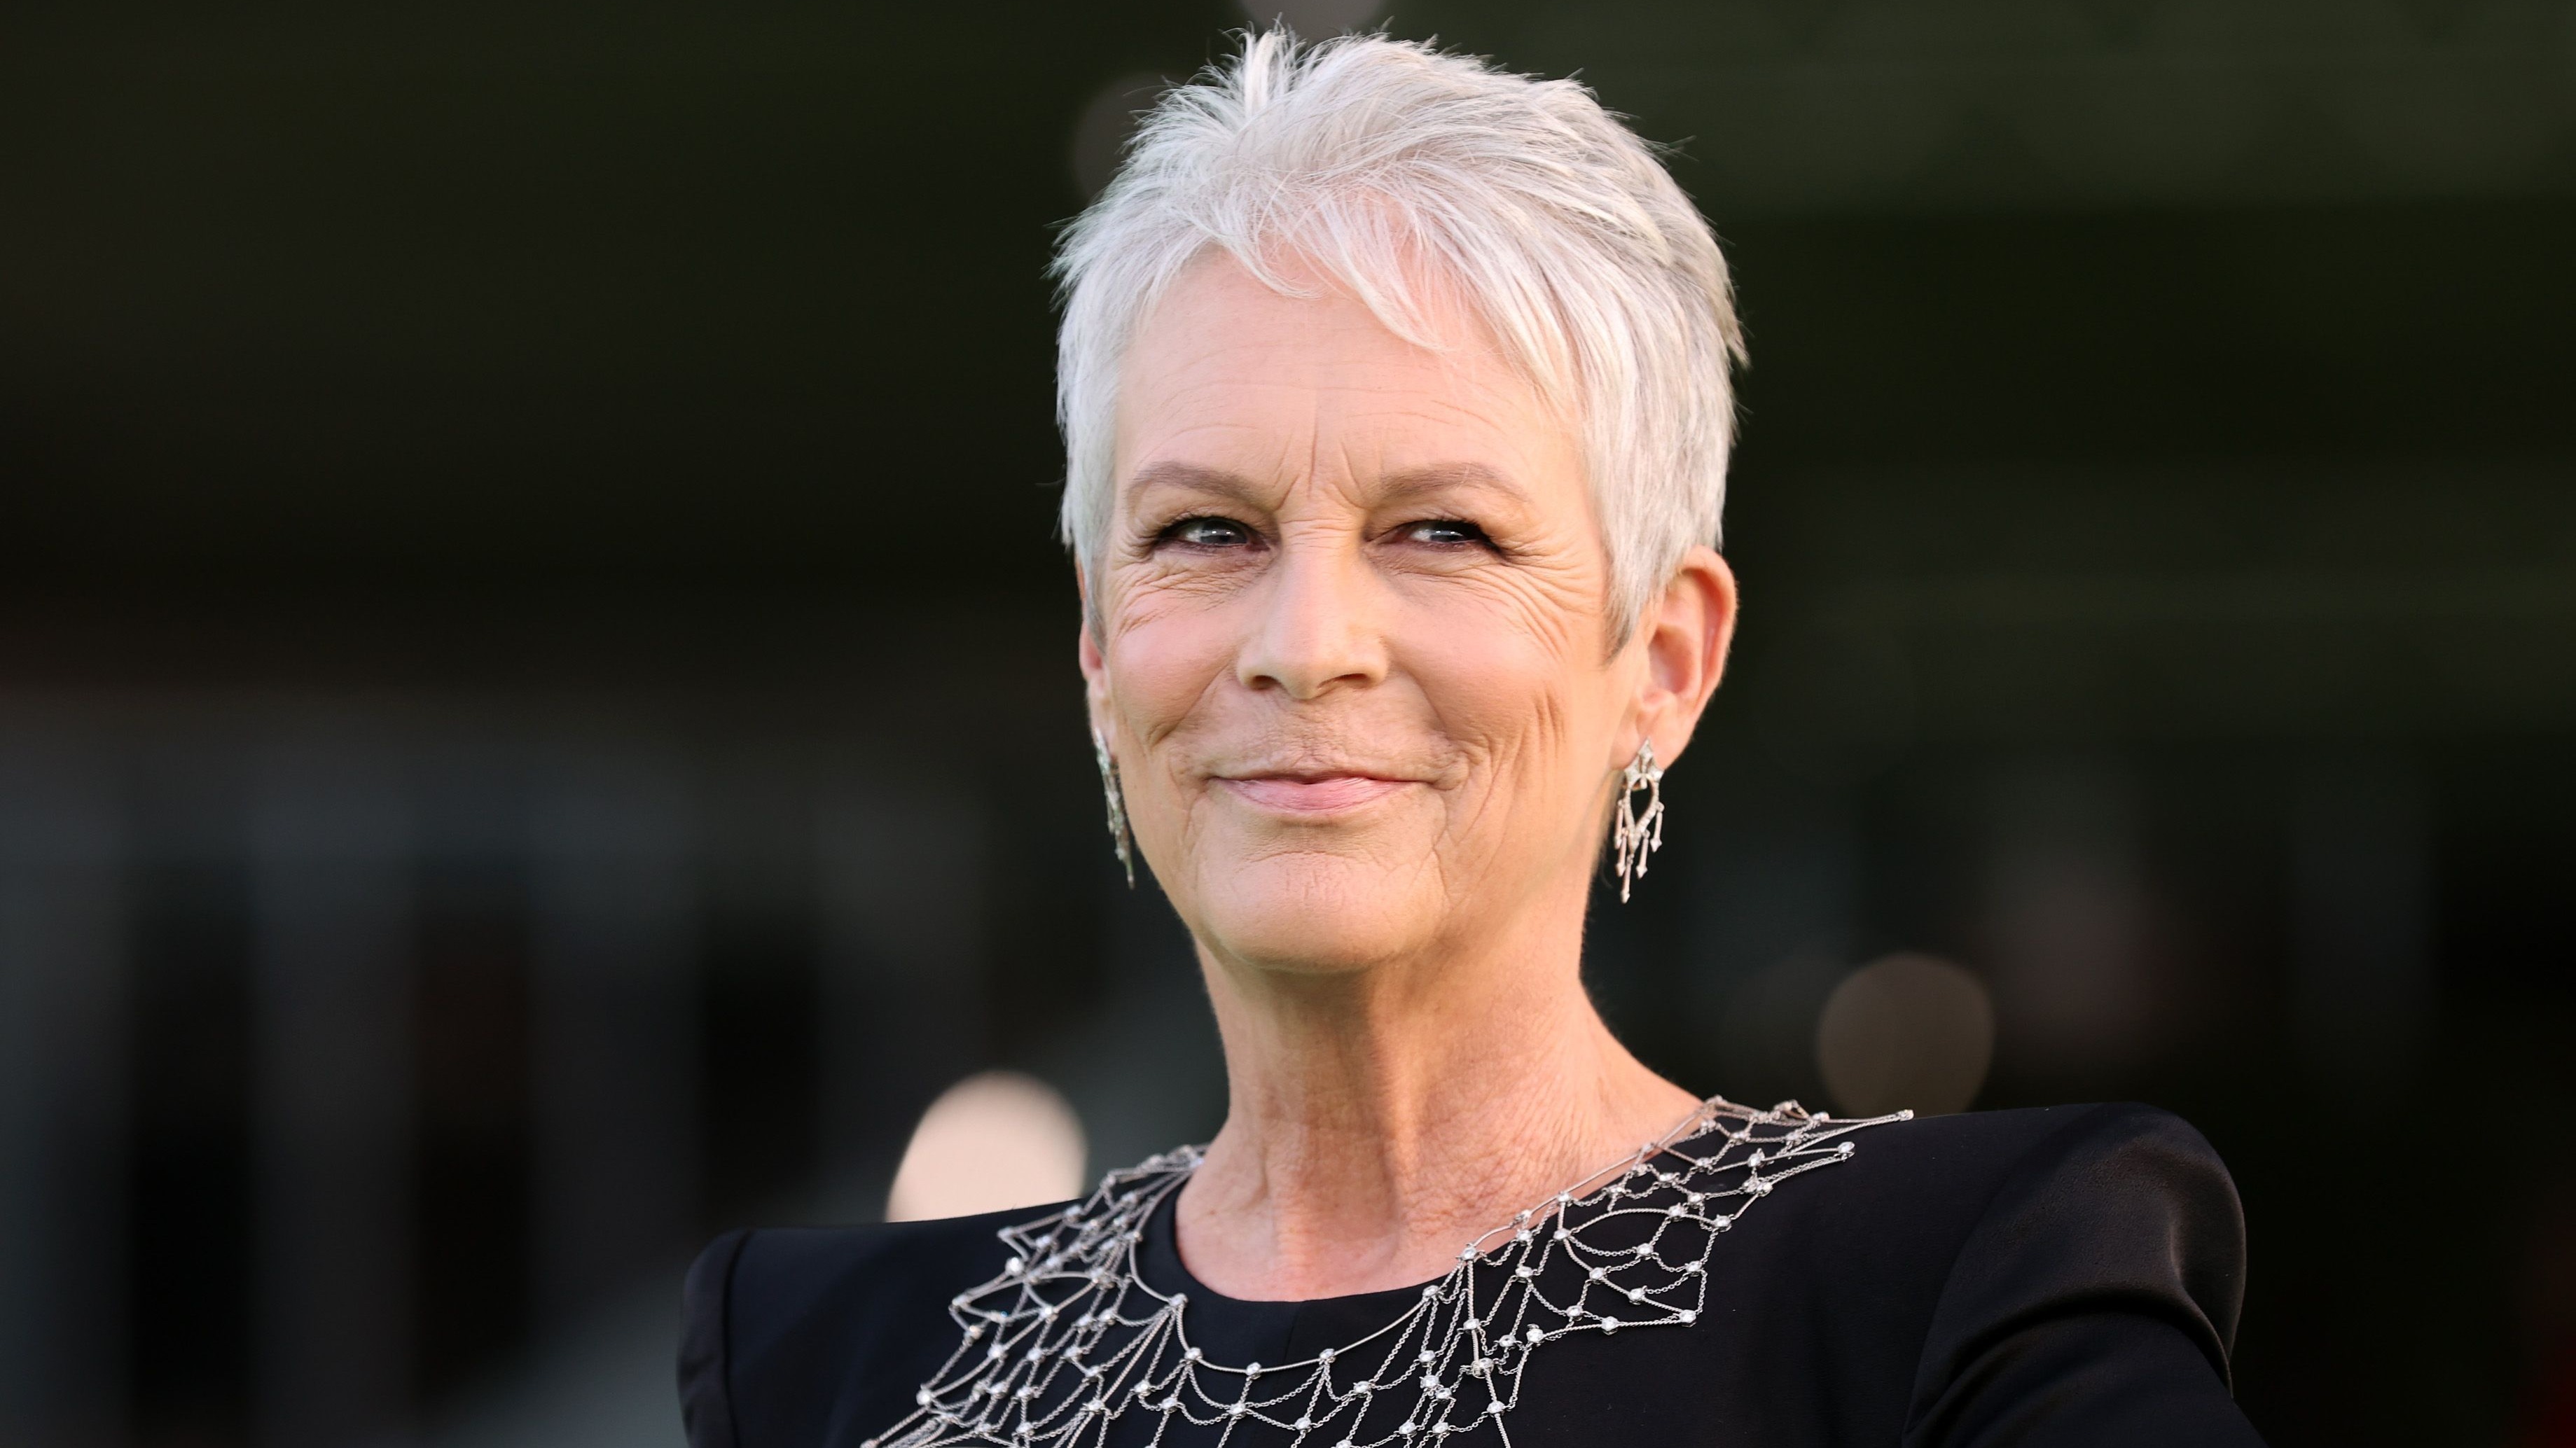 Jamie Lee Curtis Gets Real About Aging And Why She Says Plastic Surgery Upsets Her